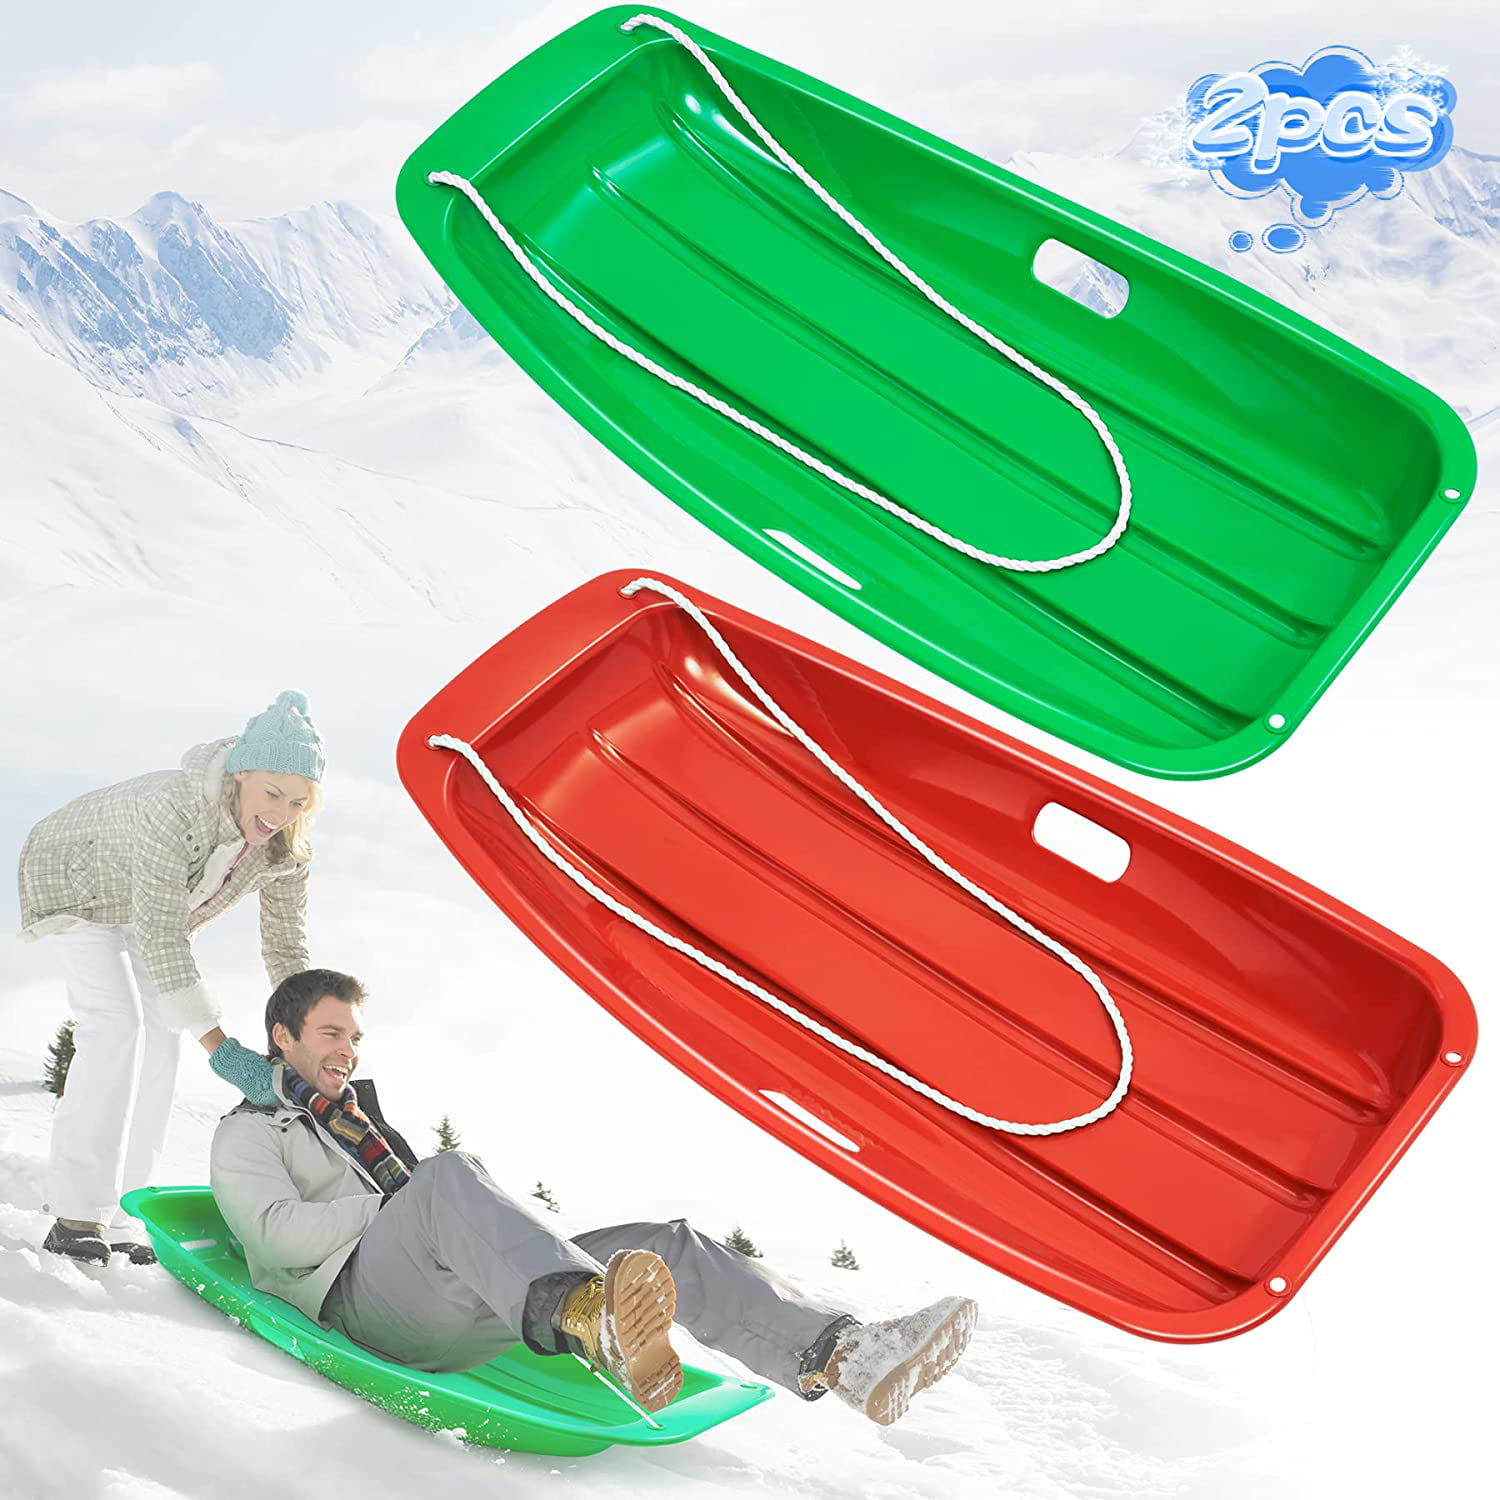 red sledge strong & sturdy for children & adults Very Large Snow Sledge 